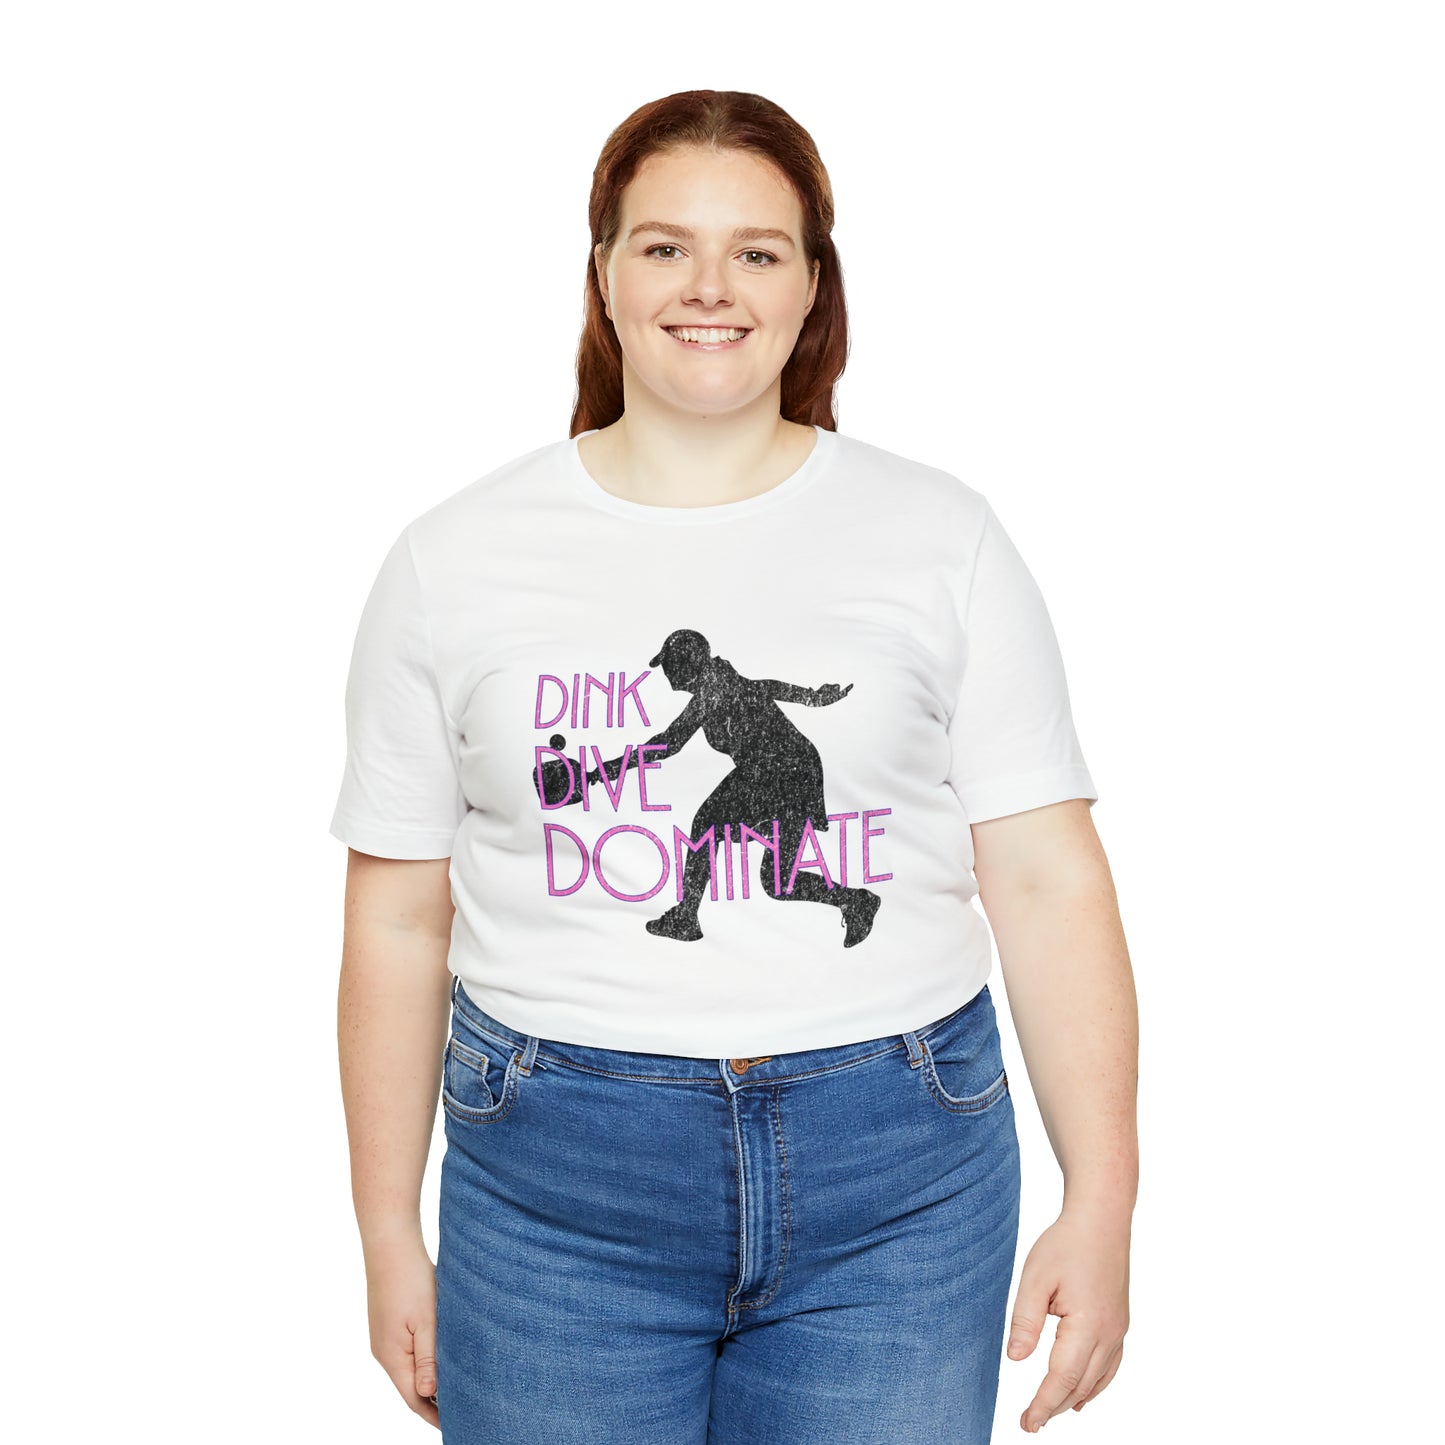 Dink, Dive, Dominate - Pickleball Player Silhouette T-Shirt